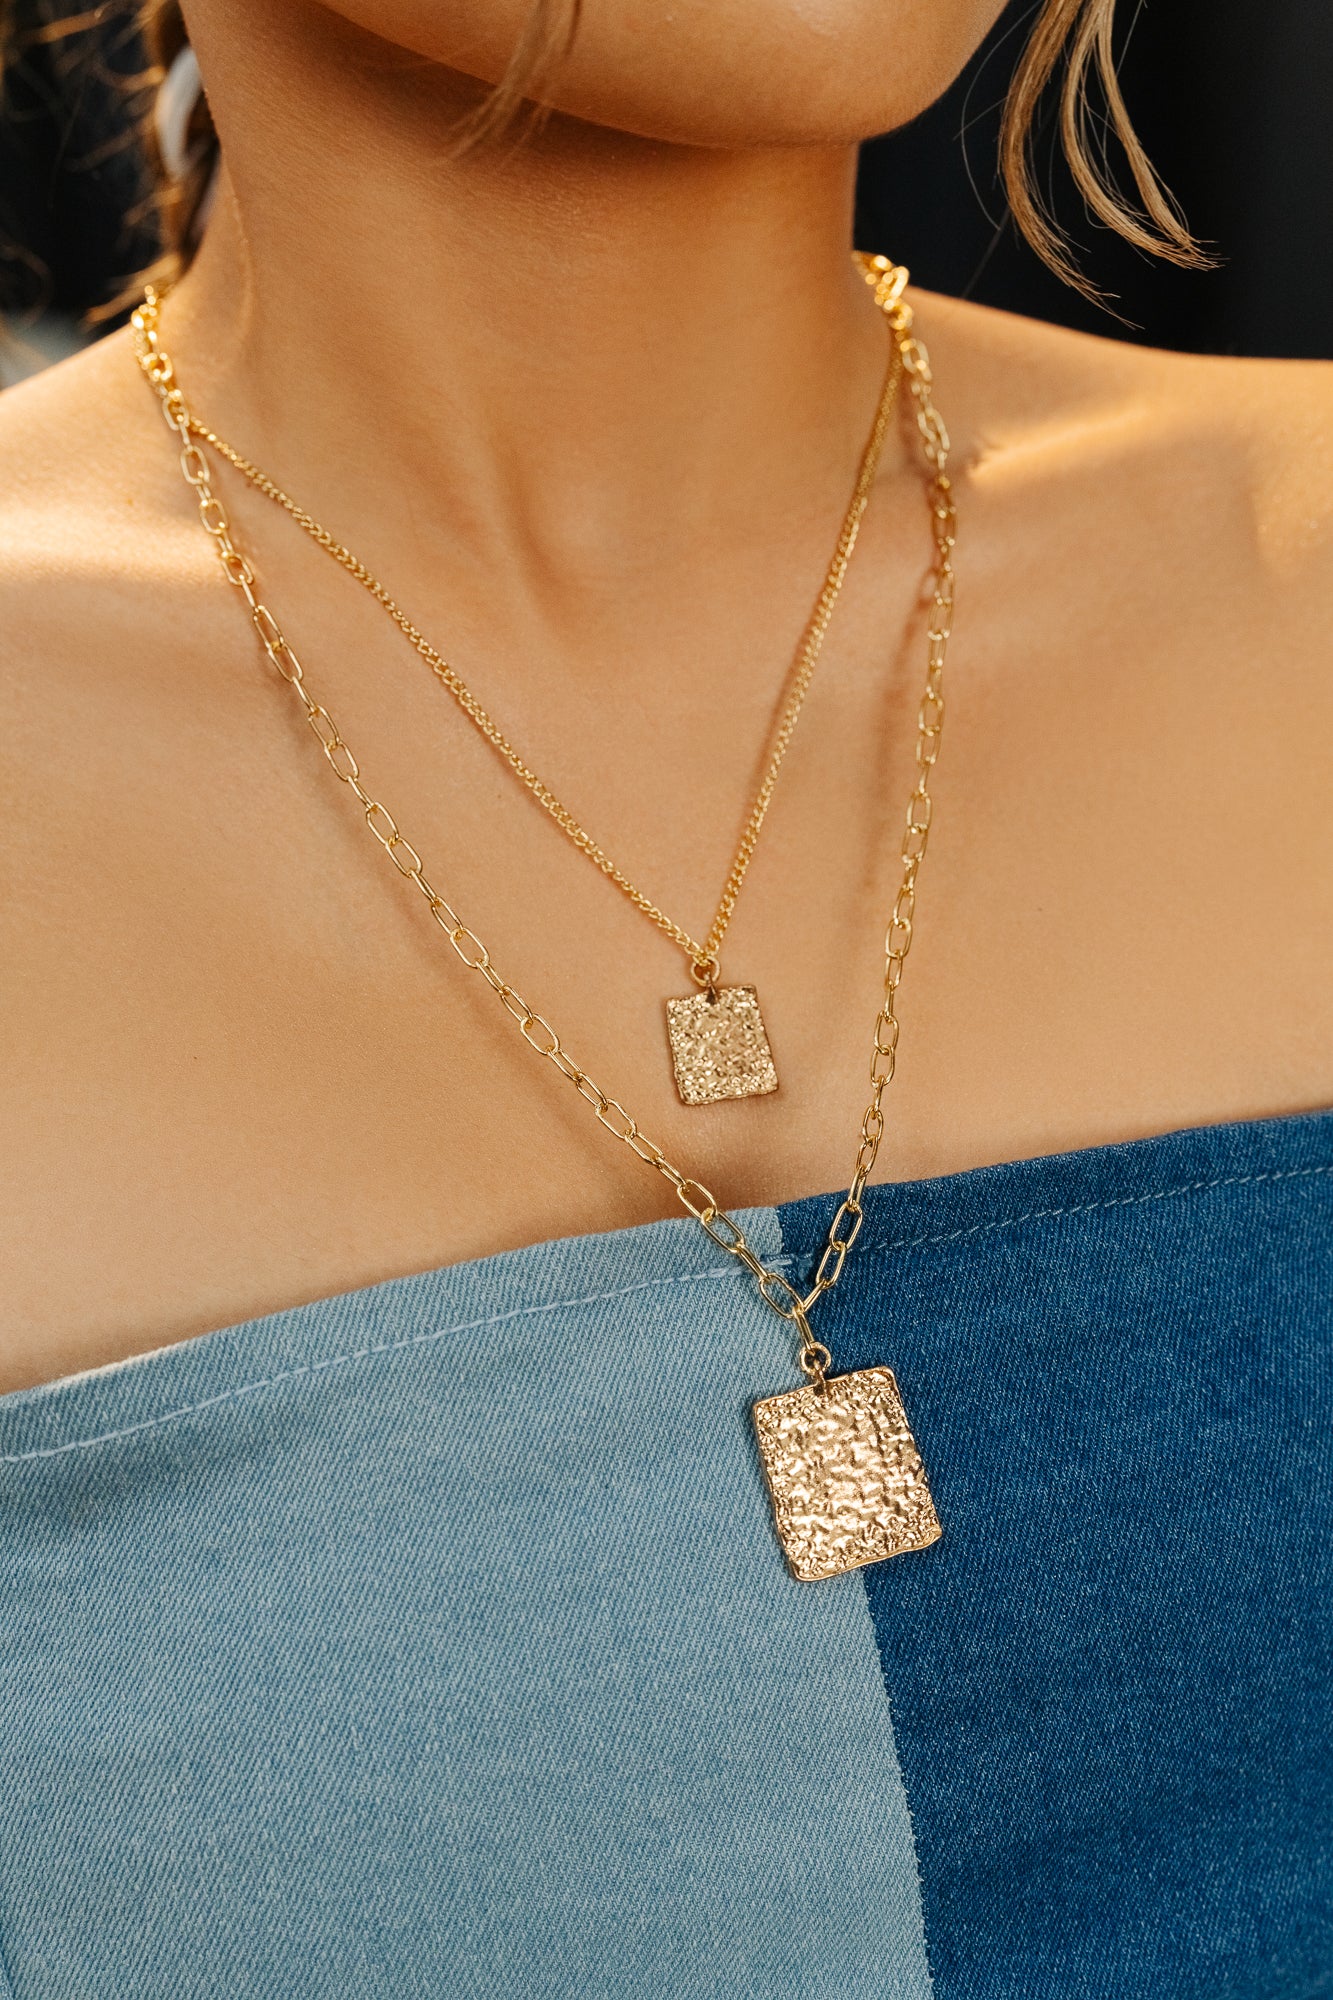 SQUARE MOLTEN METAL PENDANT NECKLACE IN LT GOLD